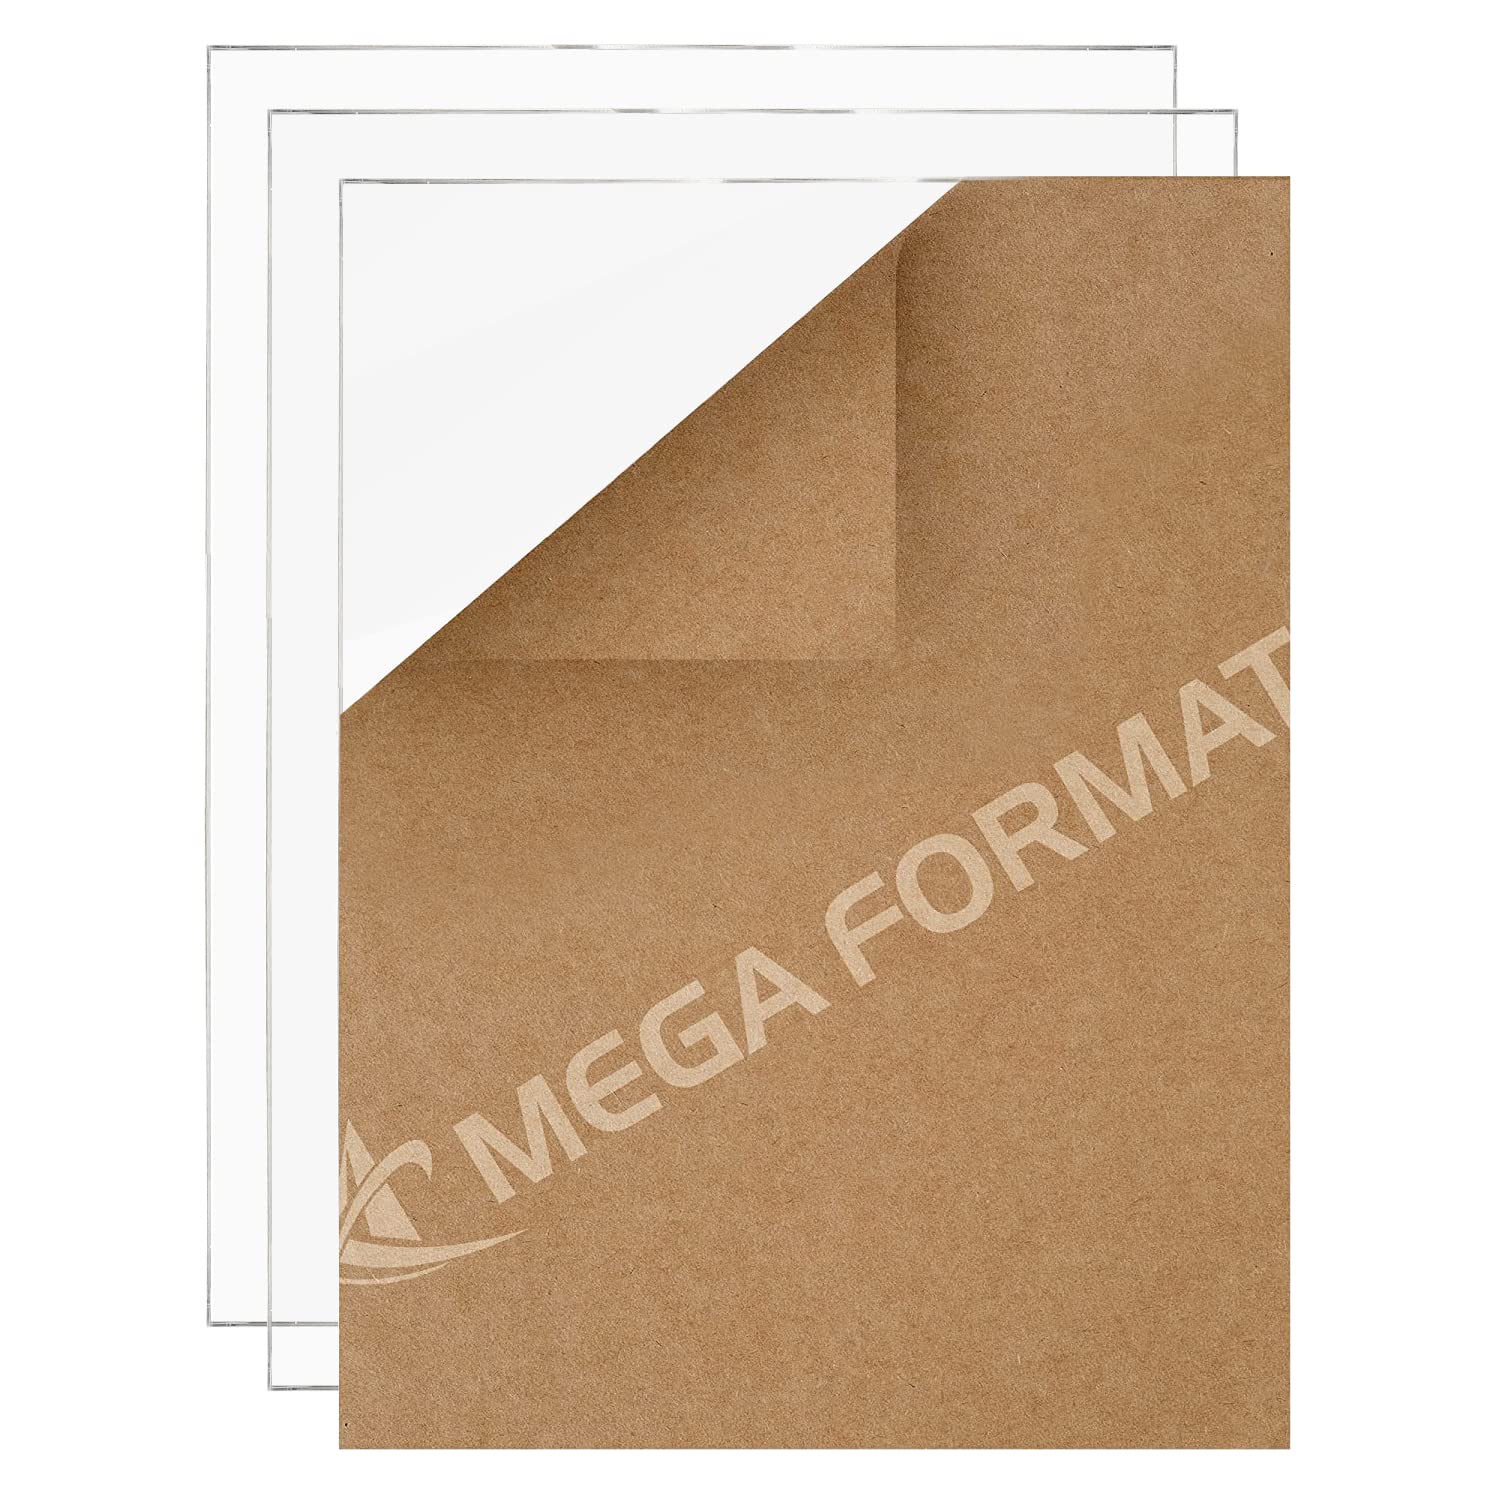 Mega Format clear Acrylic Sheet - Plexiglass Sheets 14 Inch Thick, 12 A 16 Acrylic Sheets with Protective Paper, Plexiglass Wind